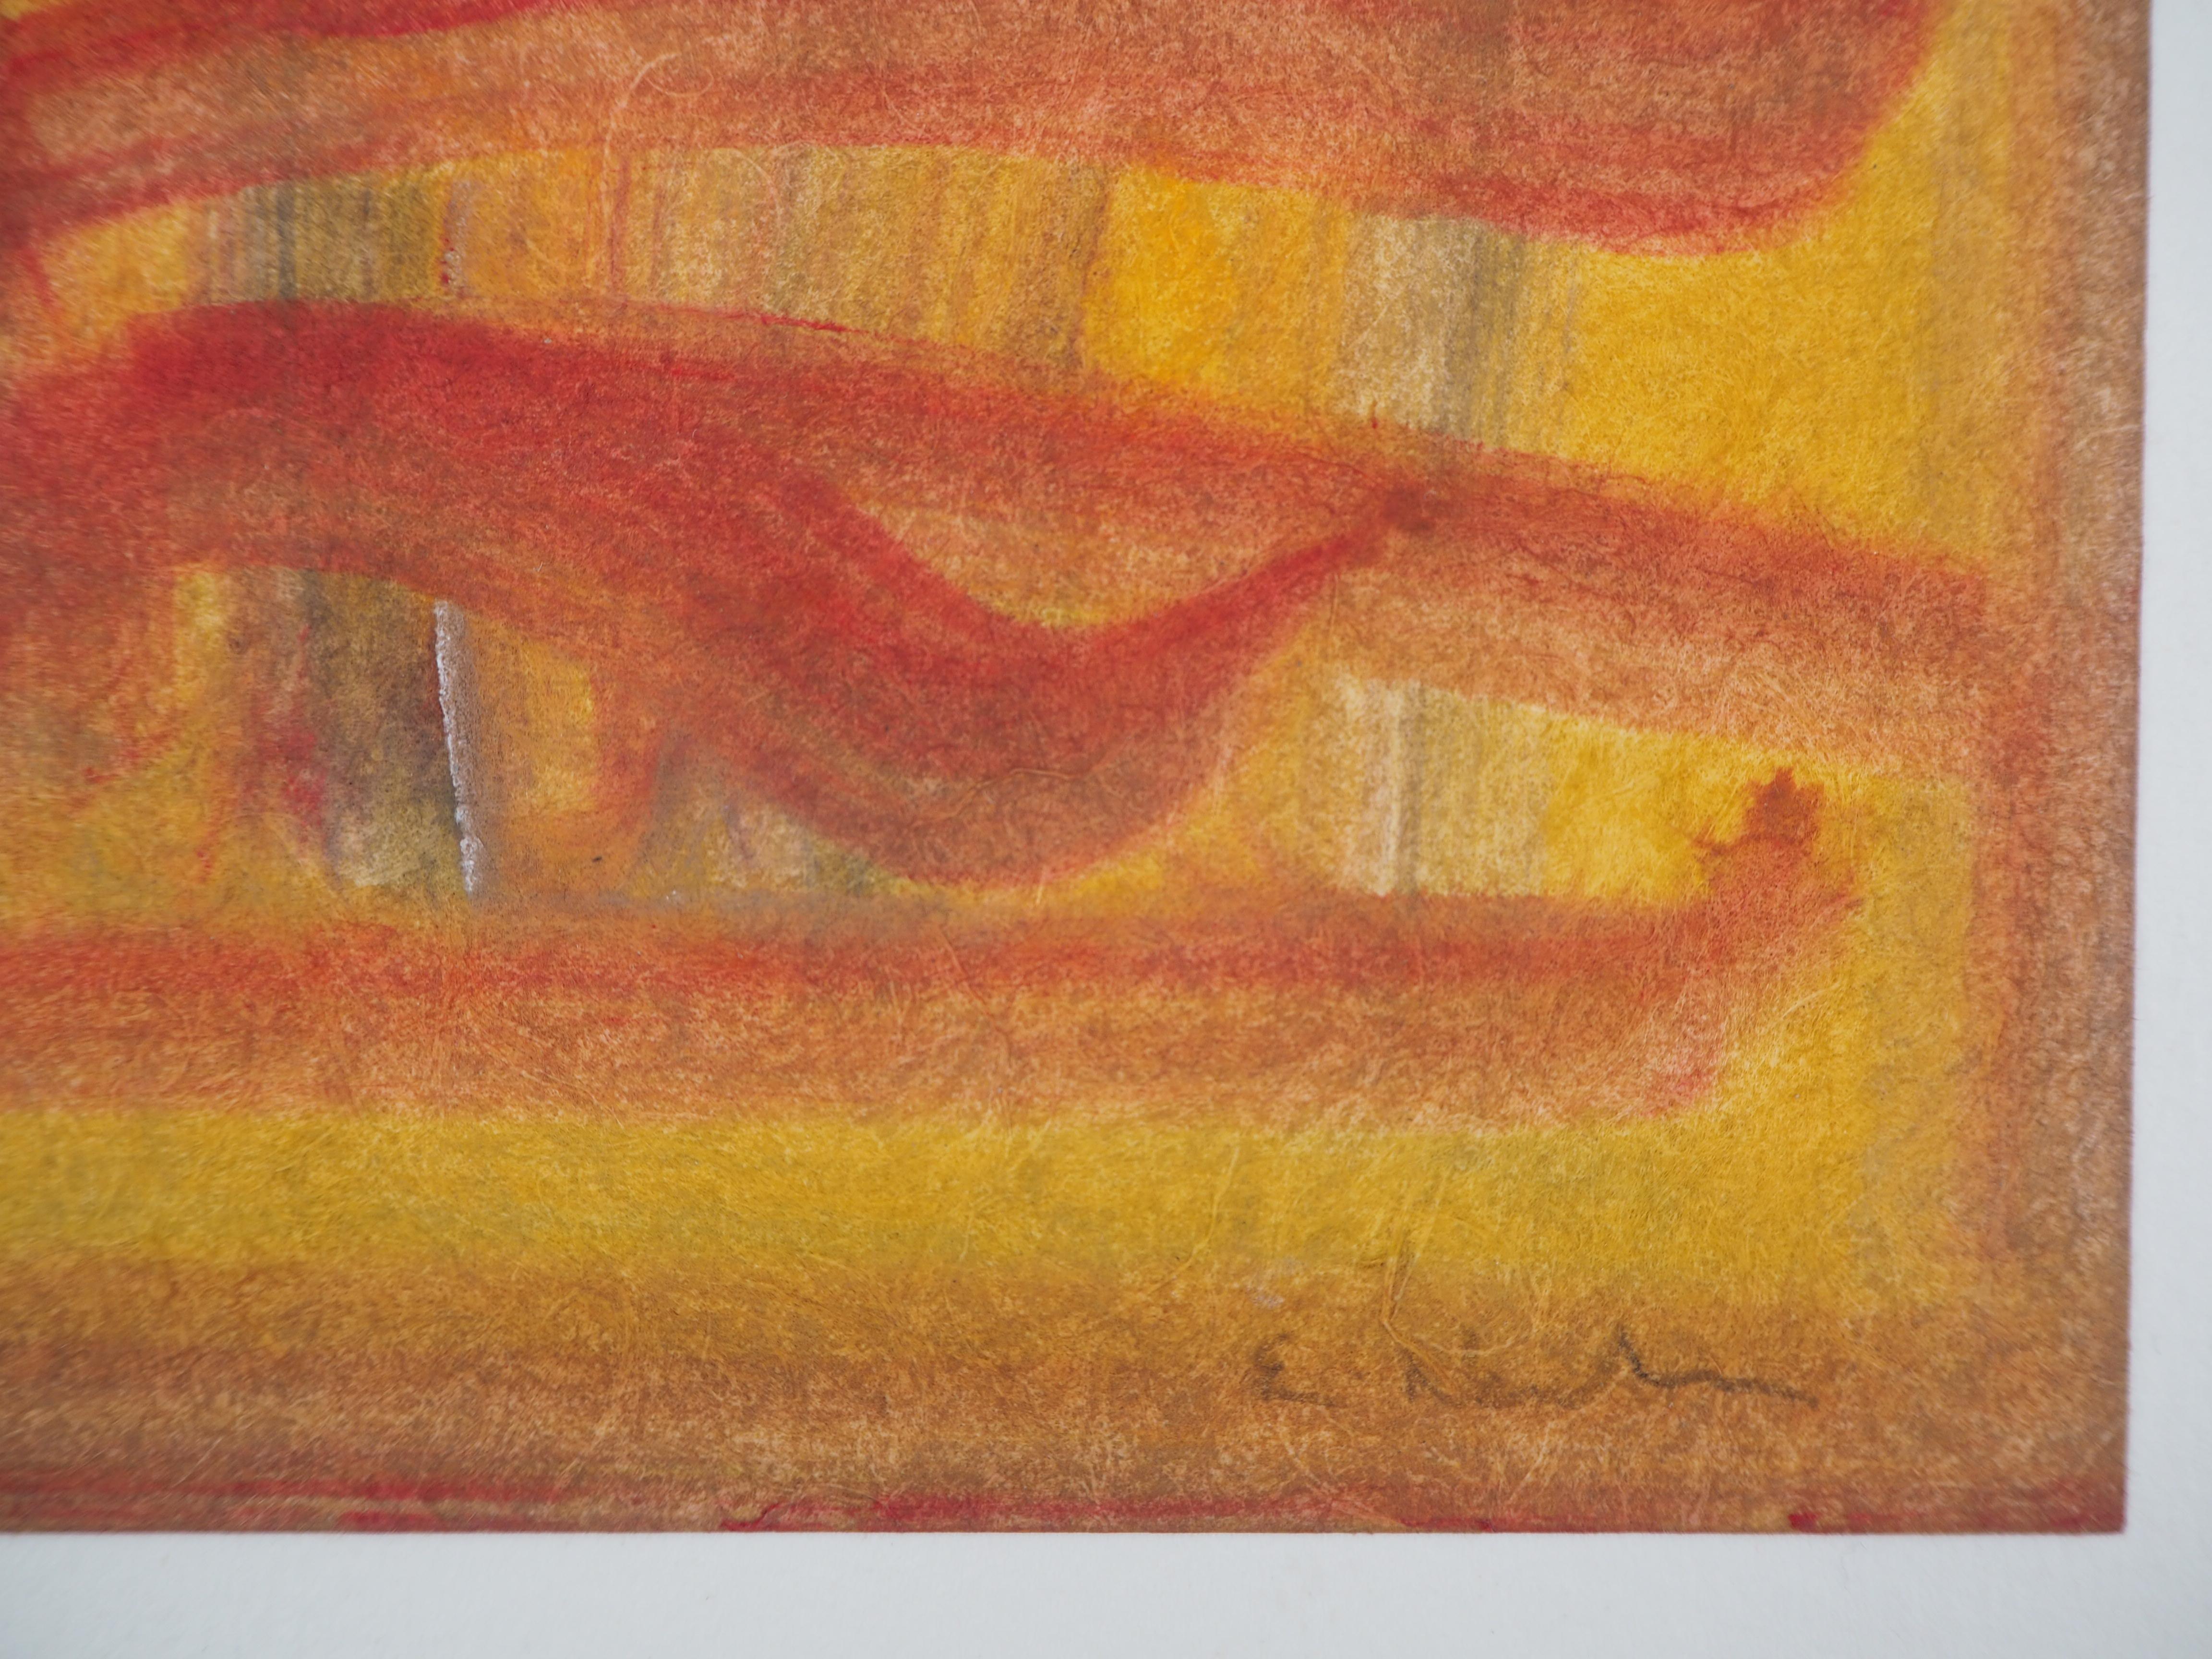 Fire - Original handsigned watercolor and tempera - Abstract Art by Ervin Neuhaus